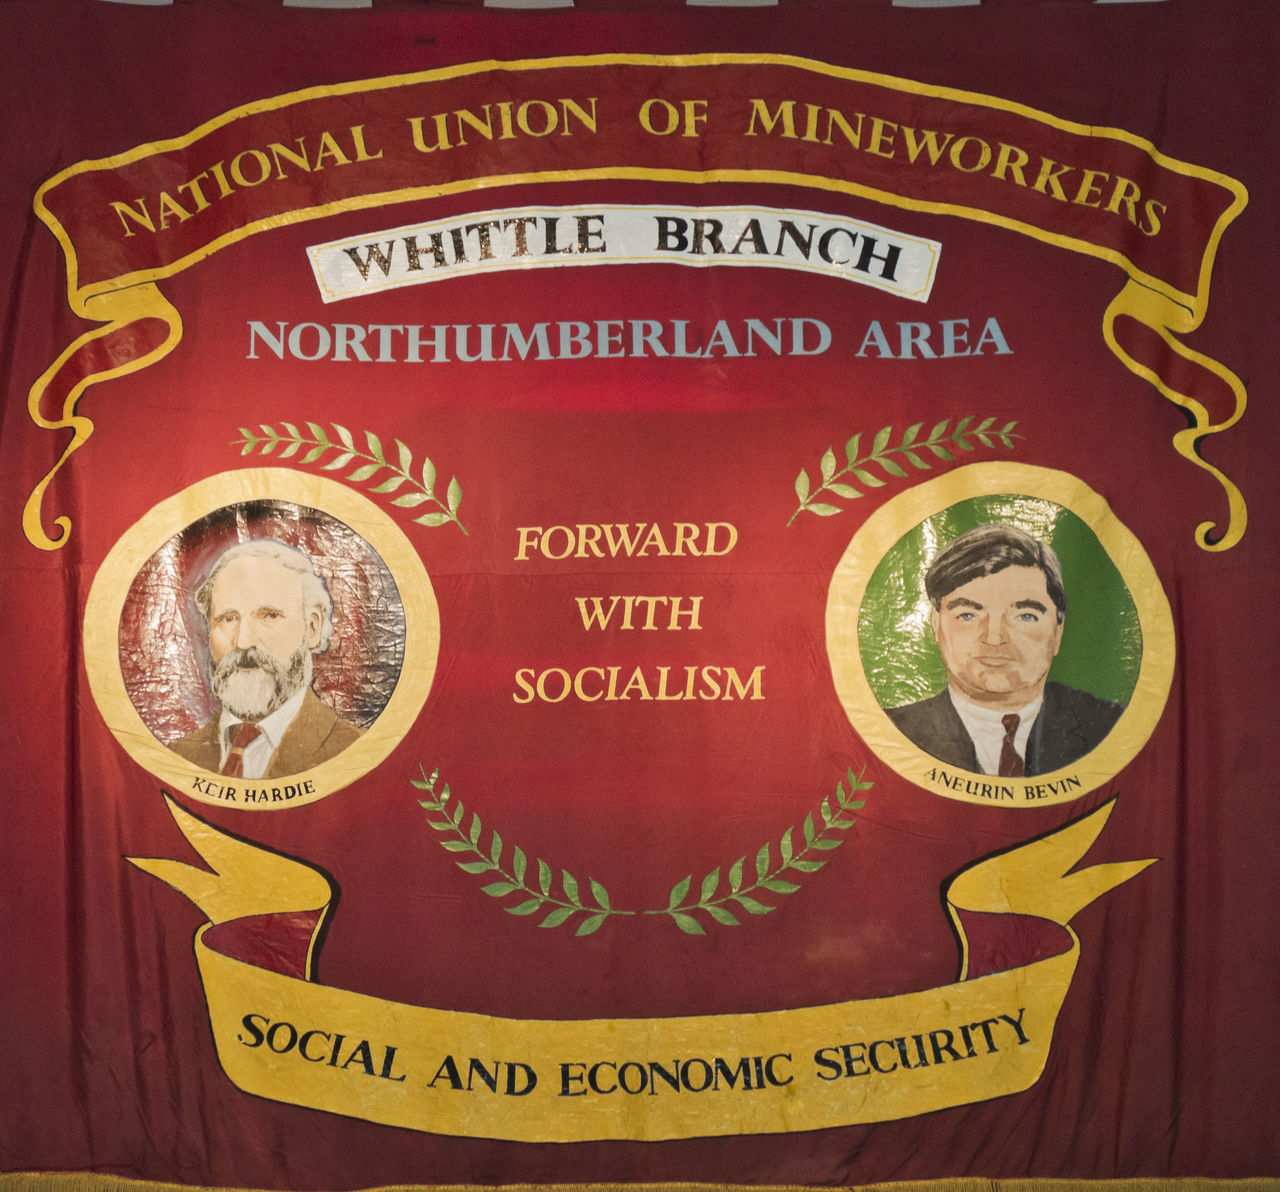 National Uion of Mineworkers